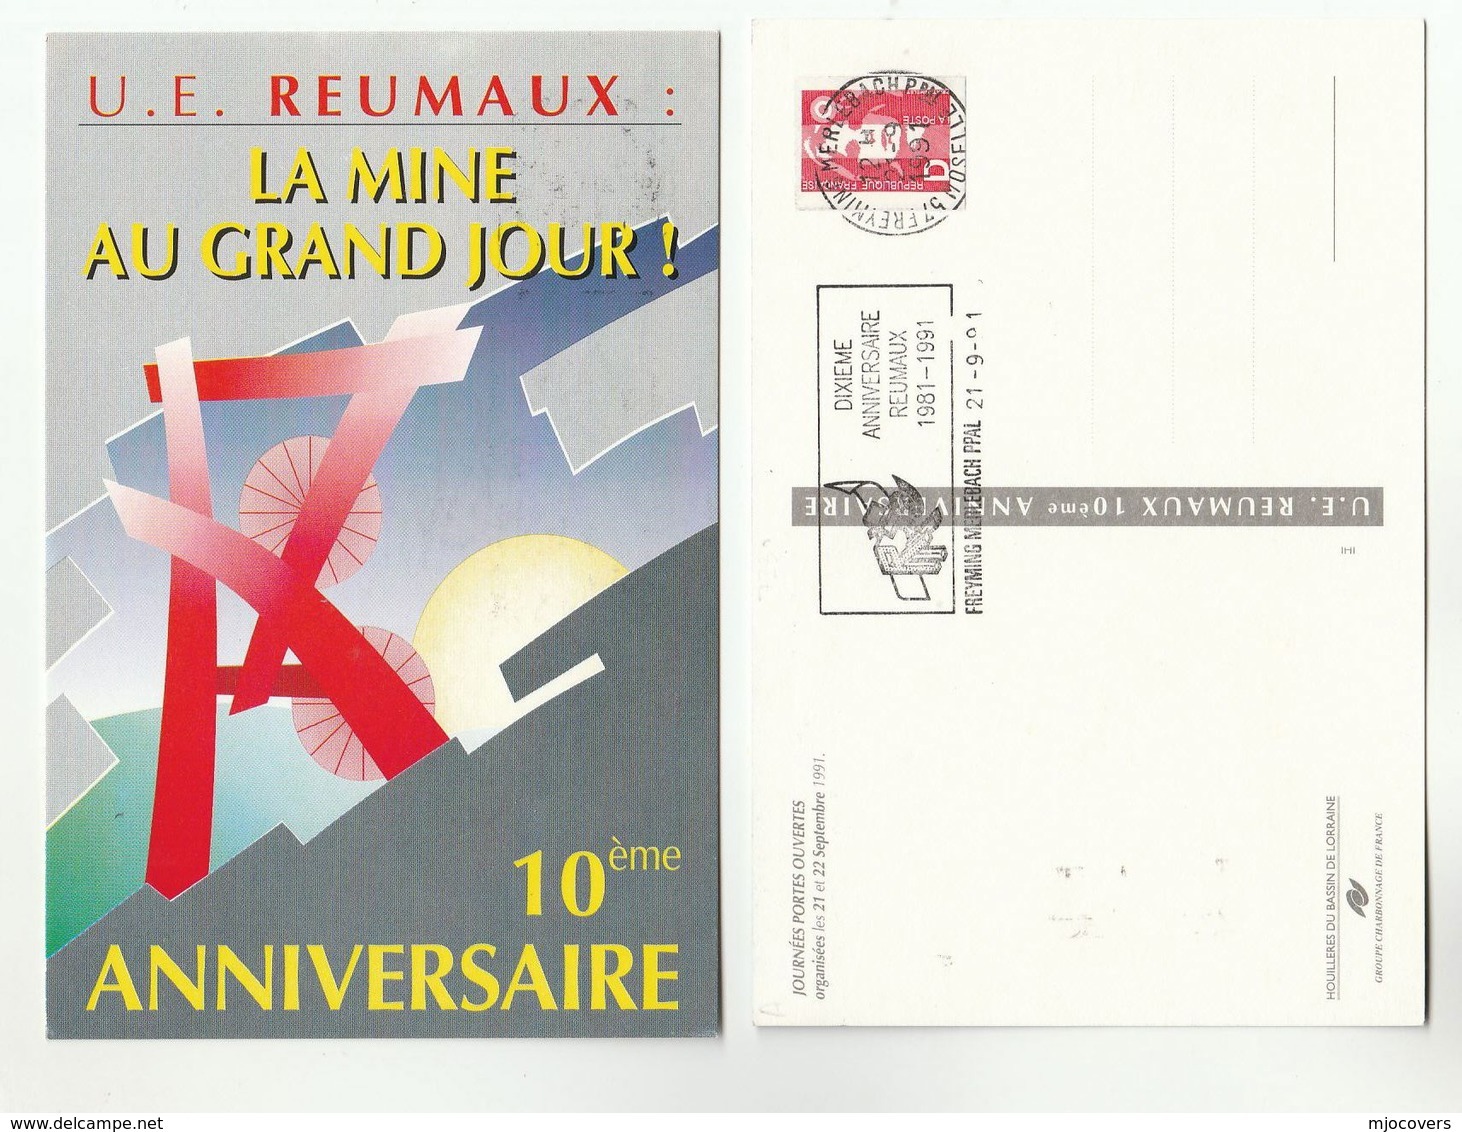 1991 REUMAUX MINING 10th Anniv EVENT COVER Freyming Merlebach France Postcard Minerals - Minerals